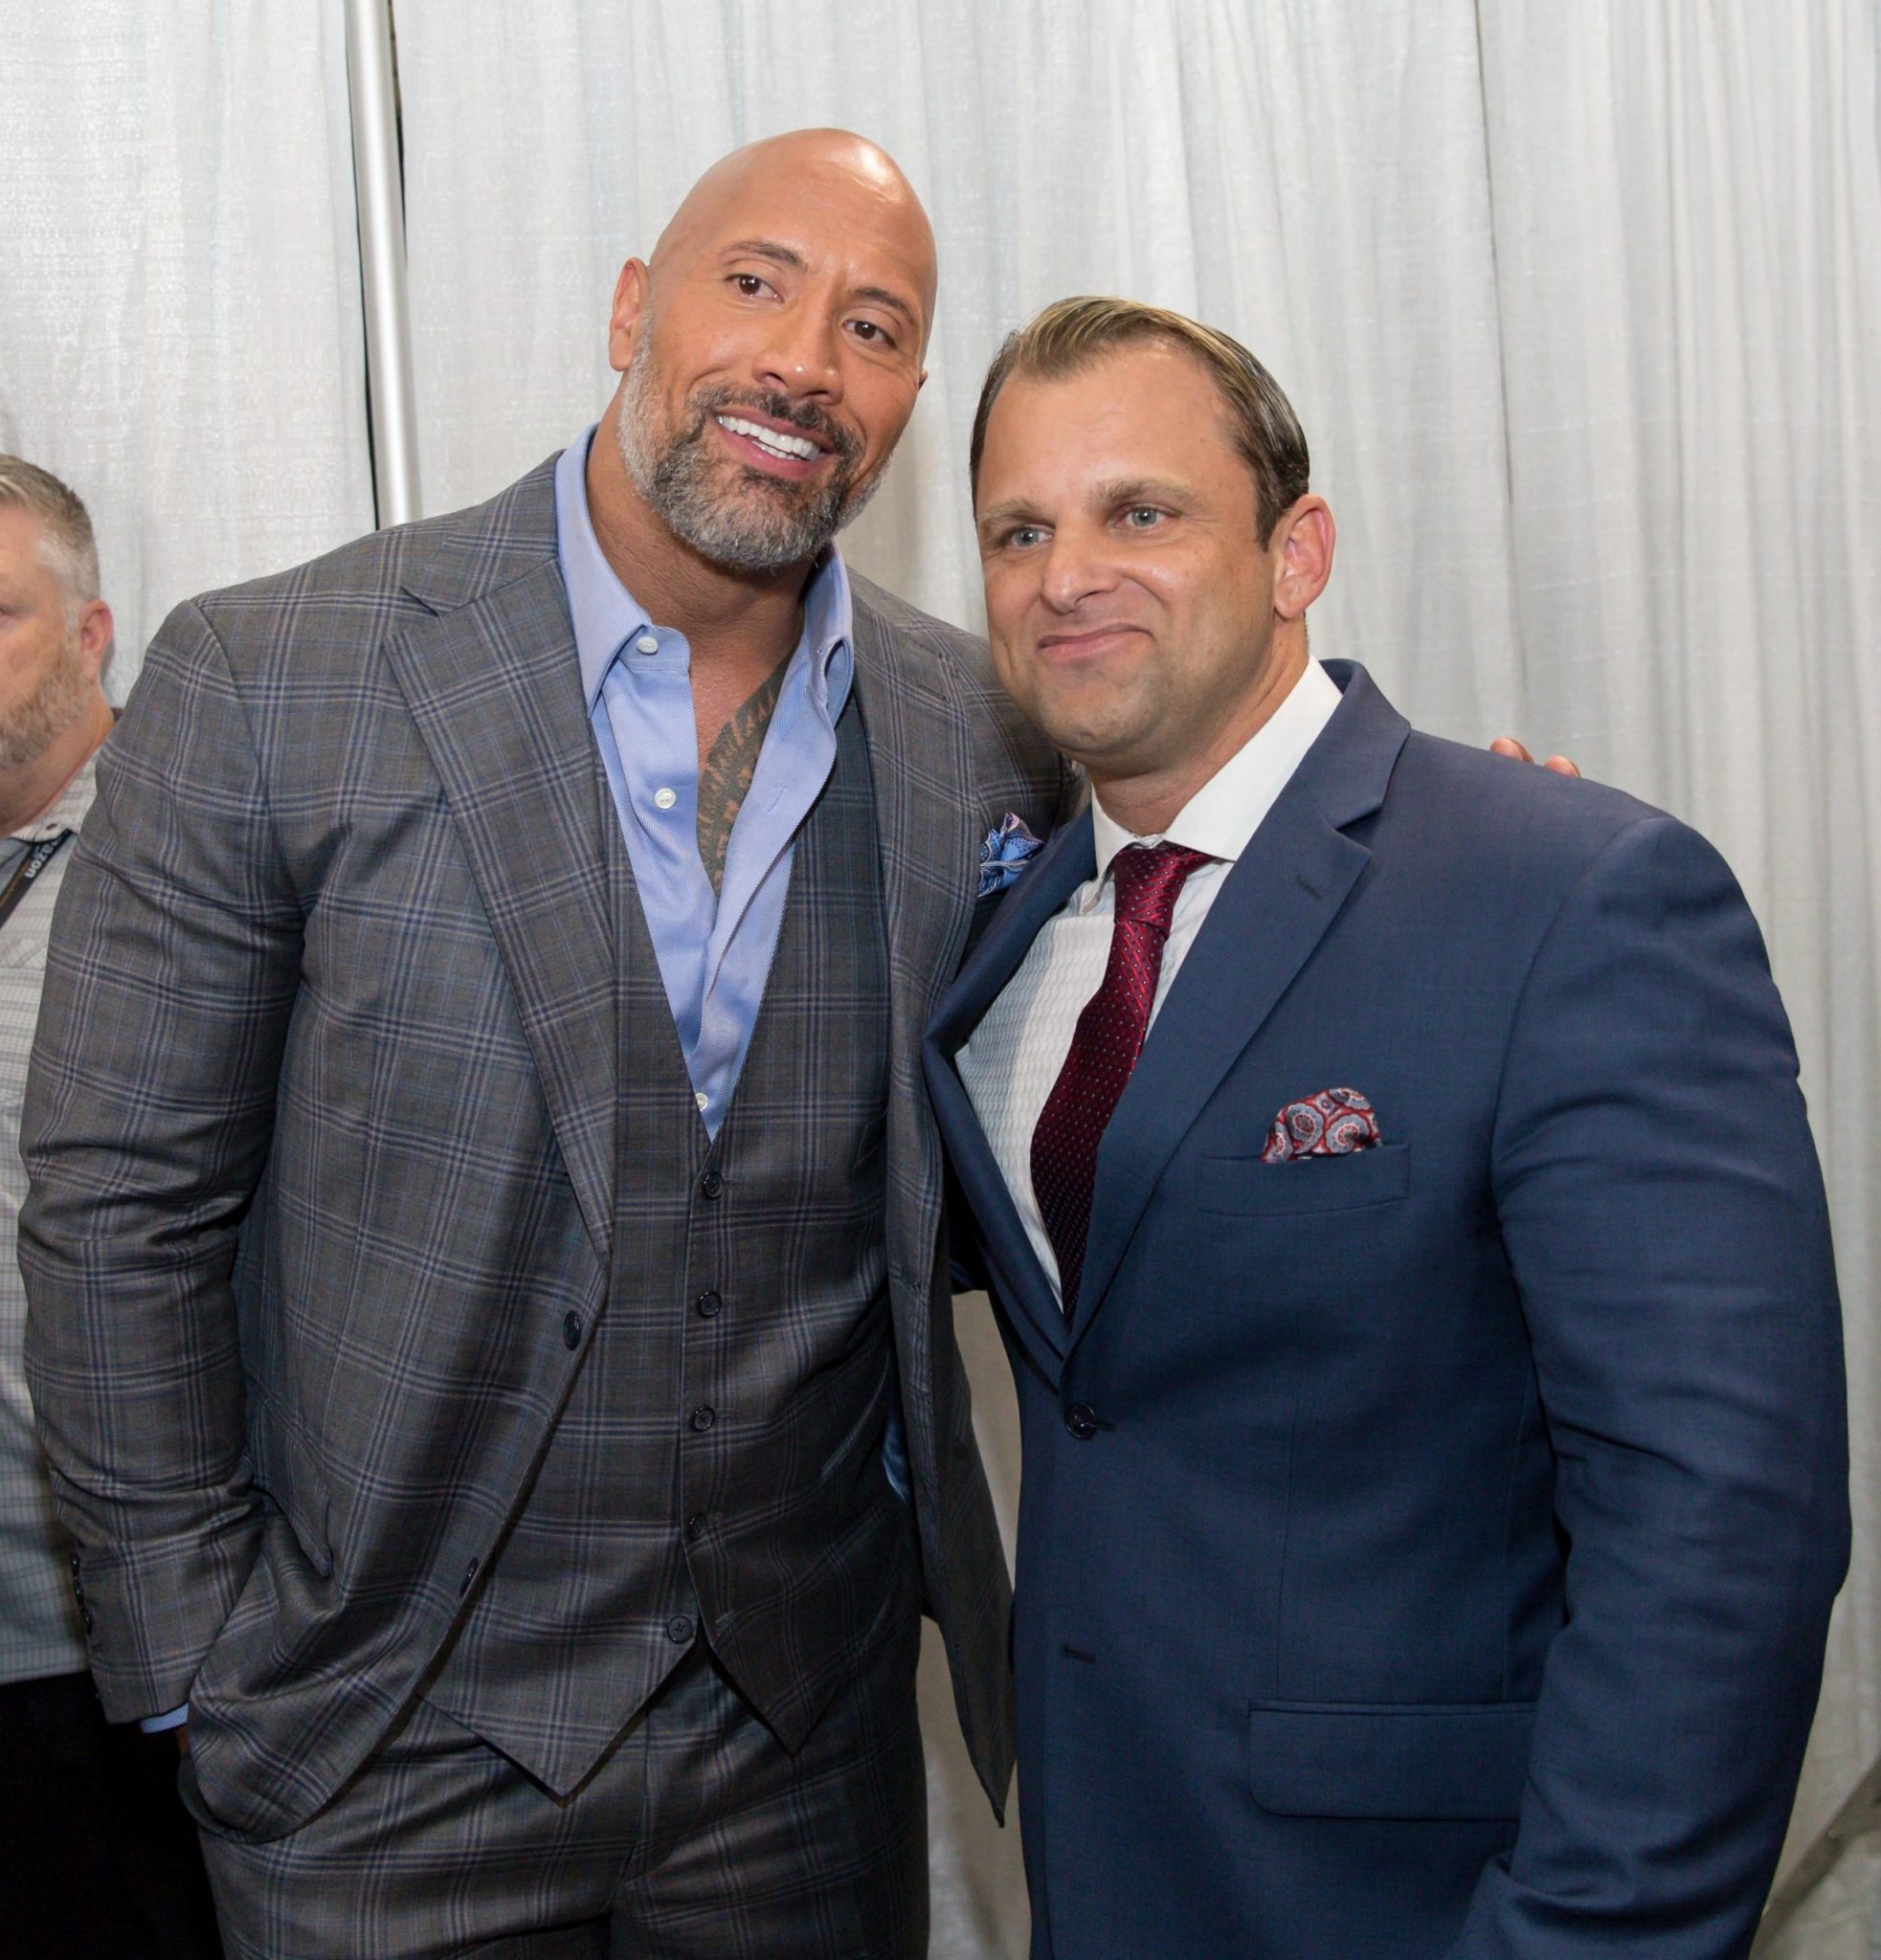 Through his work, Dan Solomon has interacted with countless celebrities, including wrestler-turned-actor Dwayne “The Rock” Johnson.